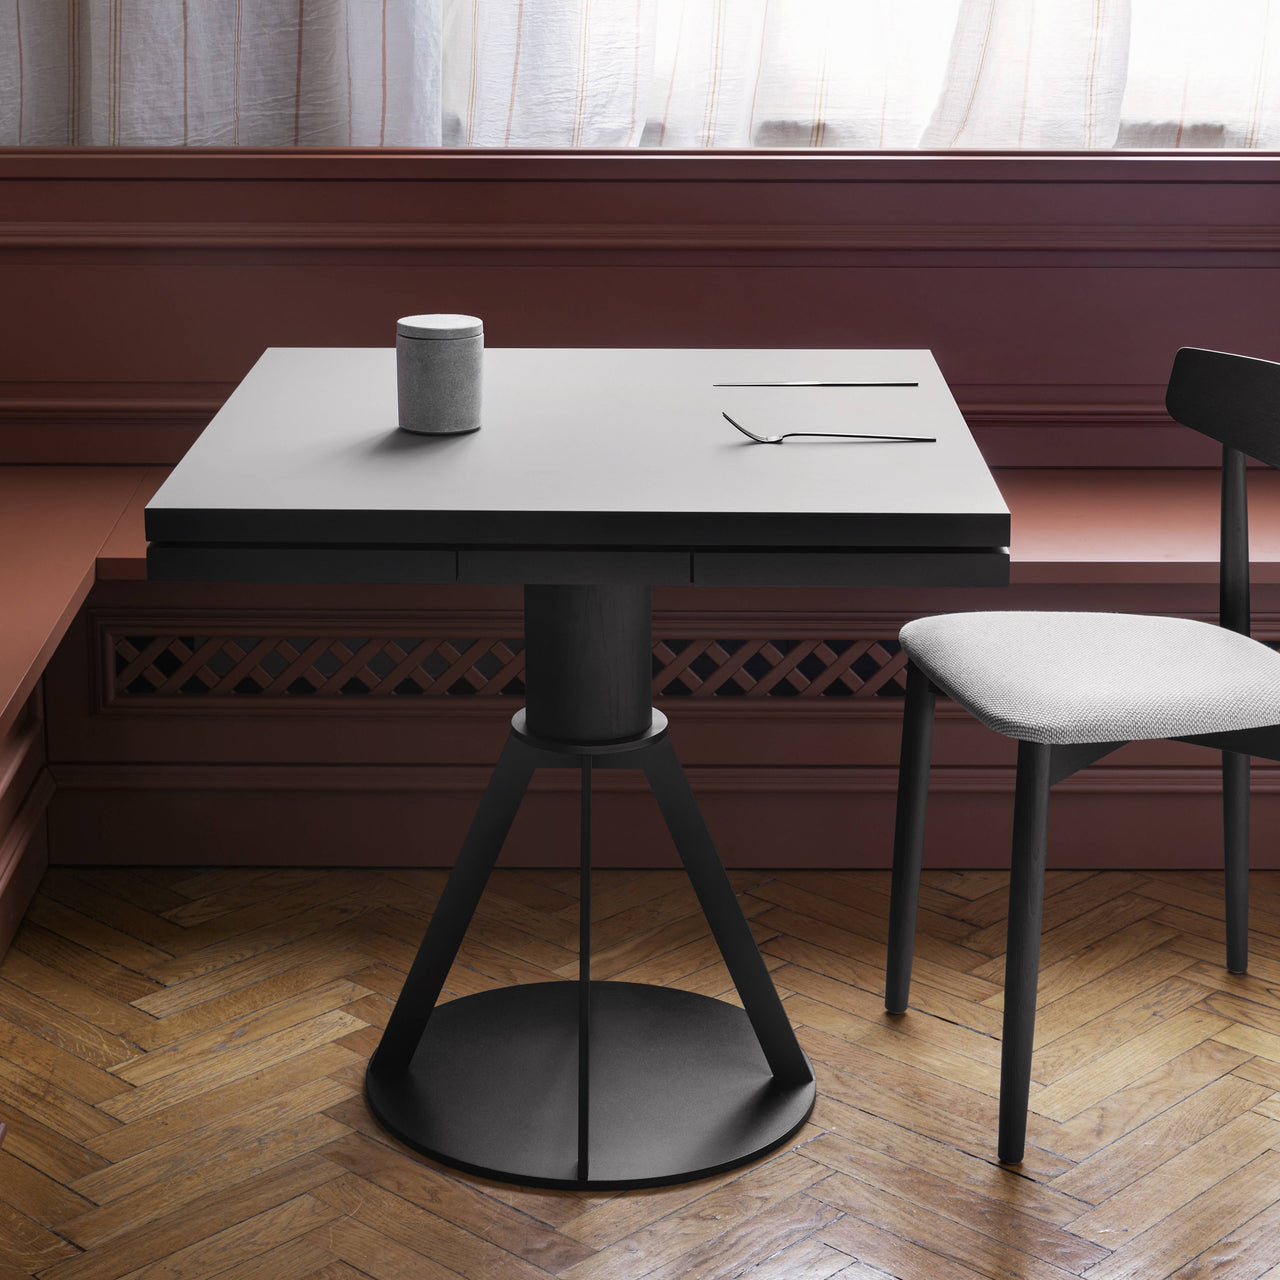 Geronimo Extendable Dining Table: Small